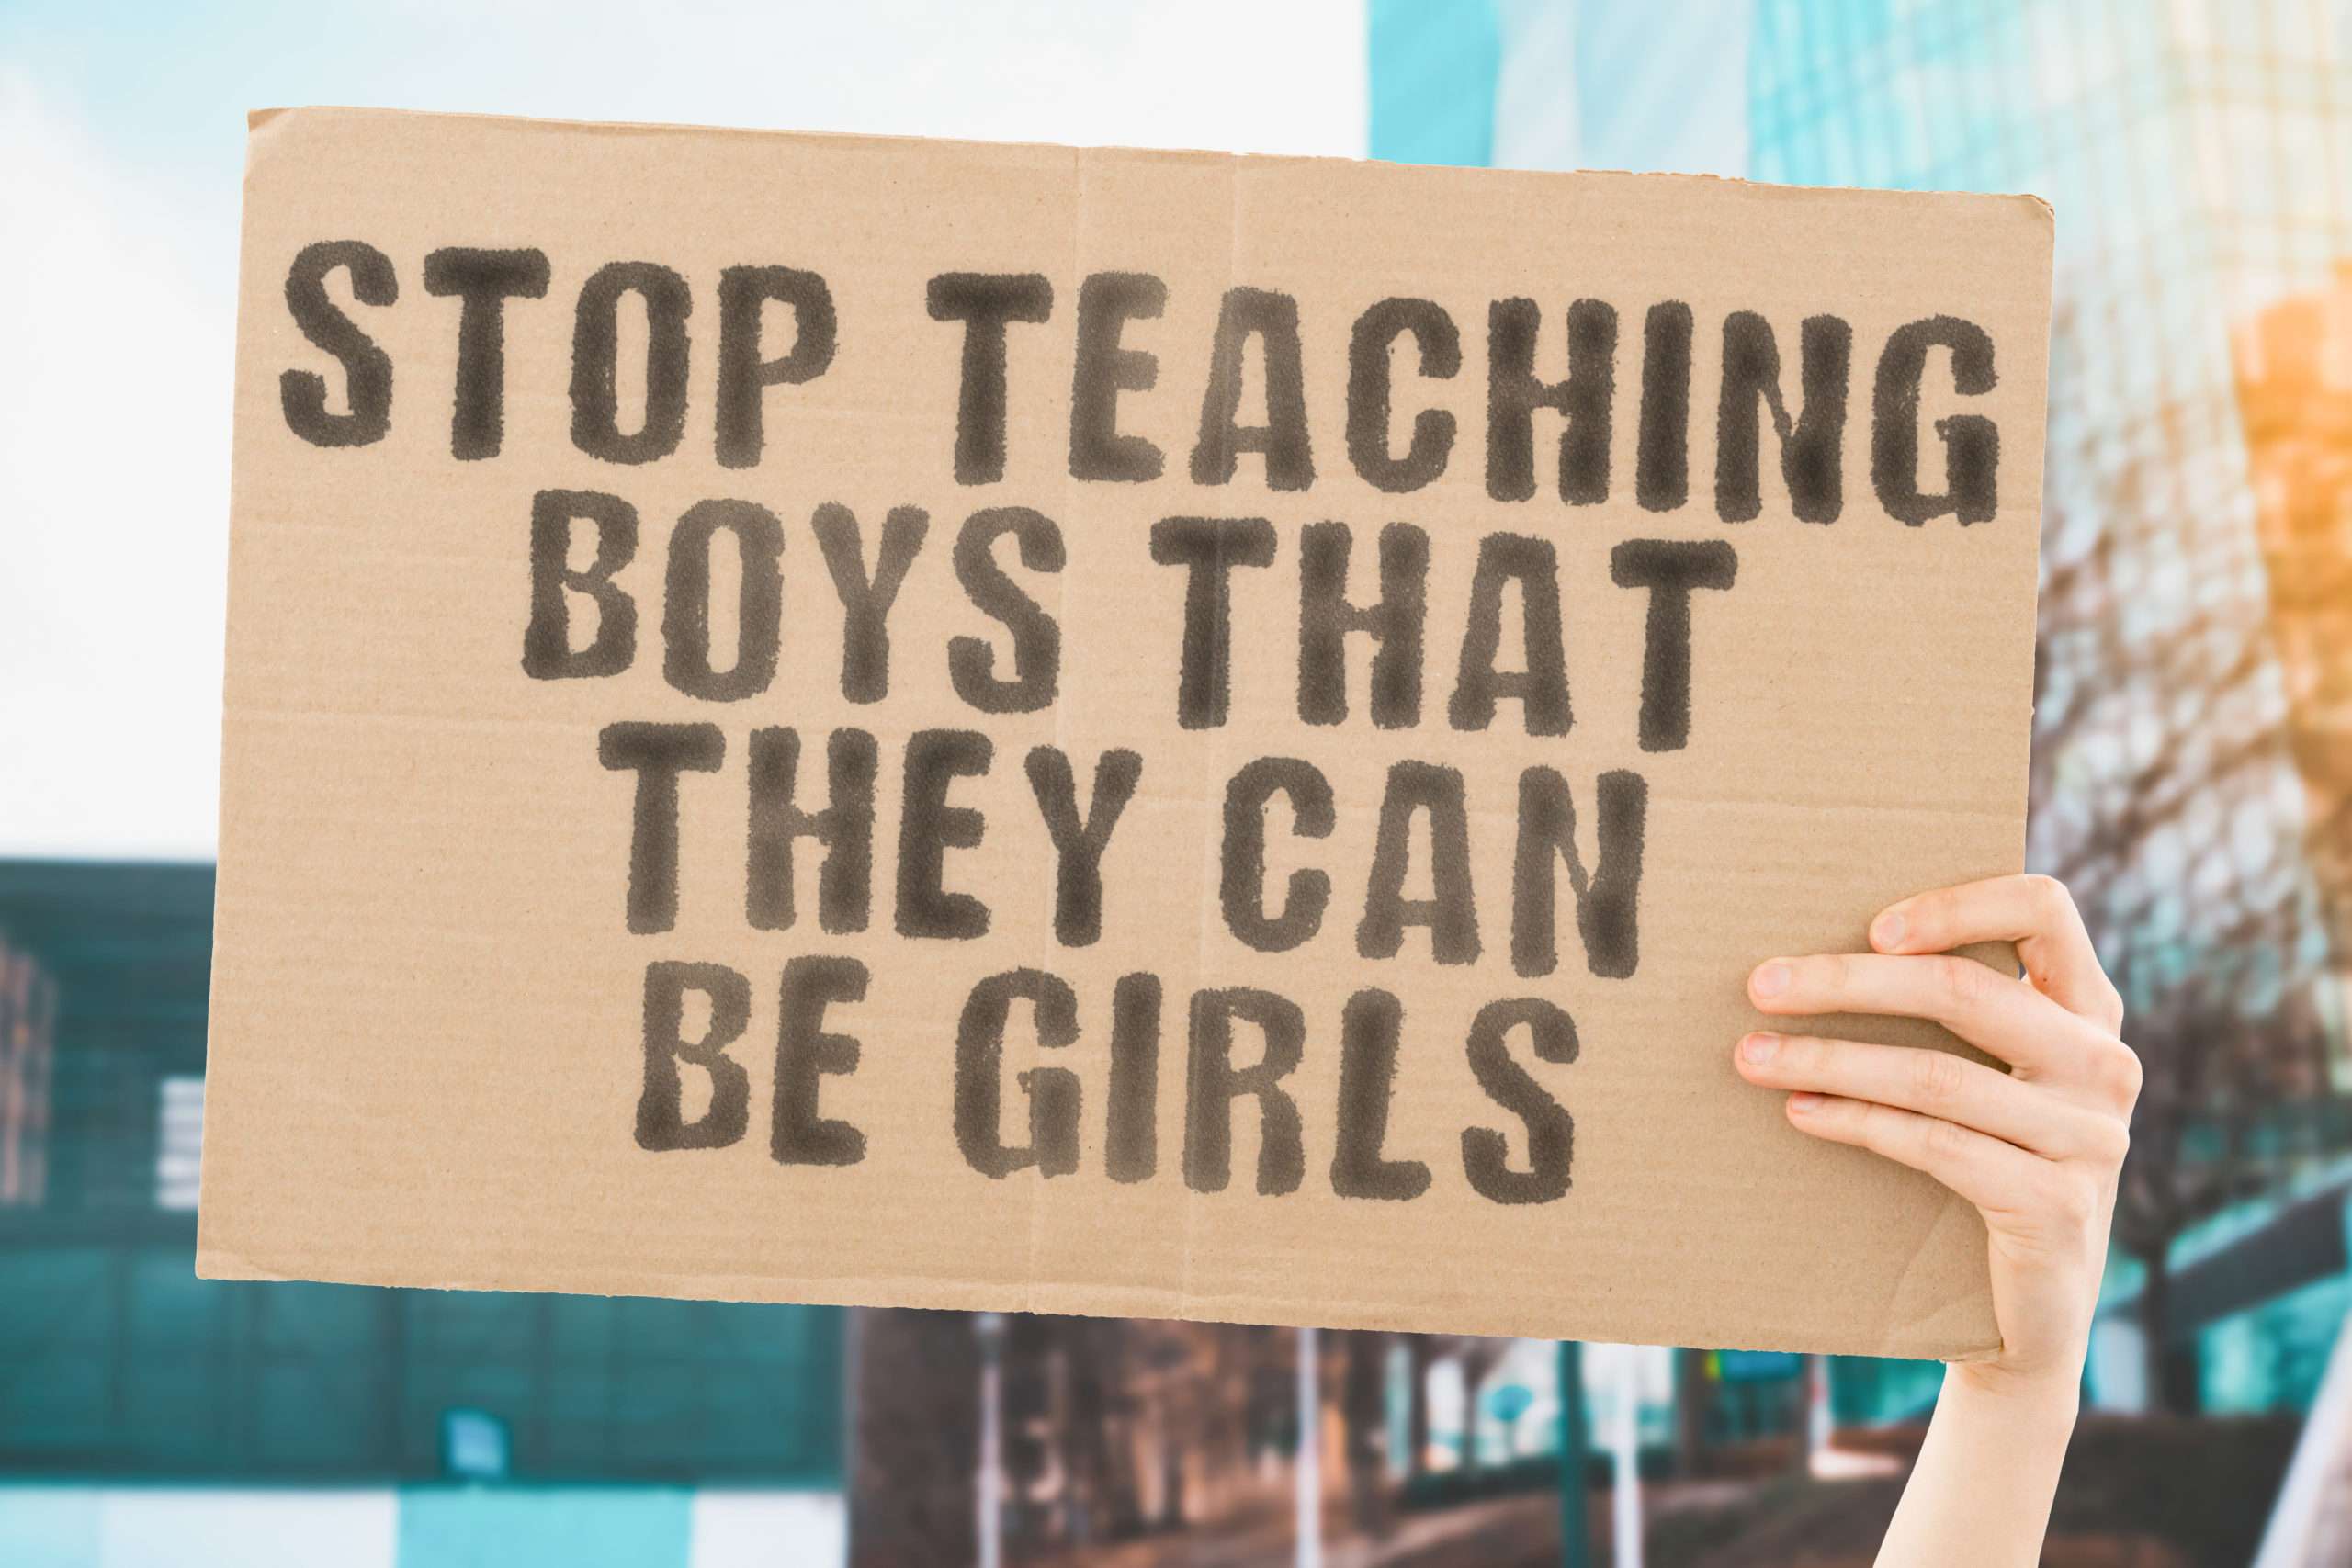 The phrase " Stop teaching boys that they can be girls " on a banner in hand with blurred background. Gay. Gays. LGBT. Education. Study. School. Same-sex. Couple